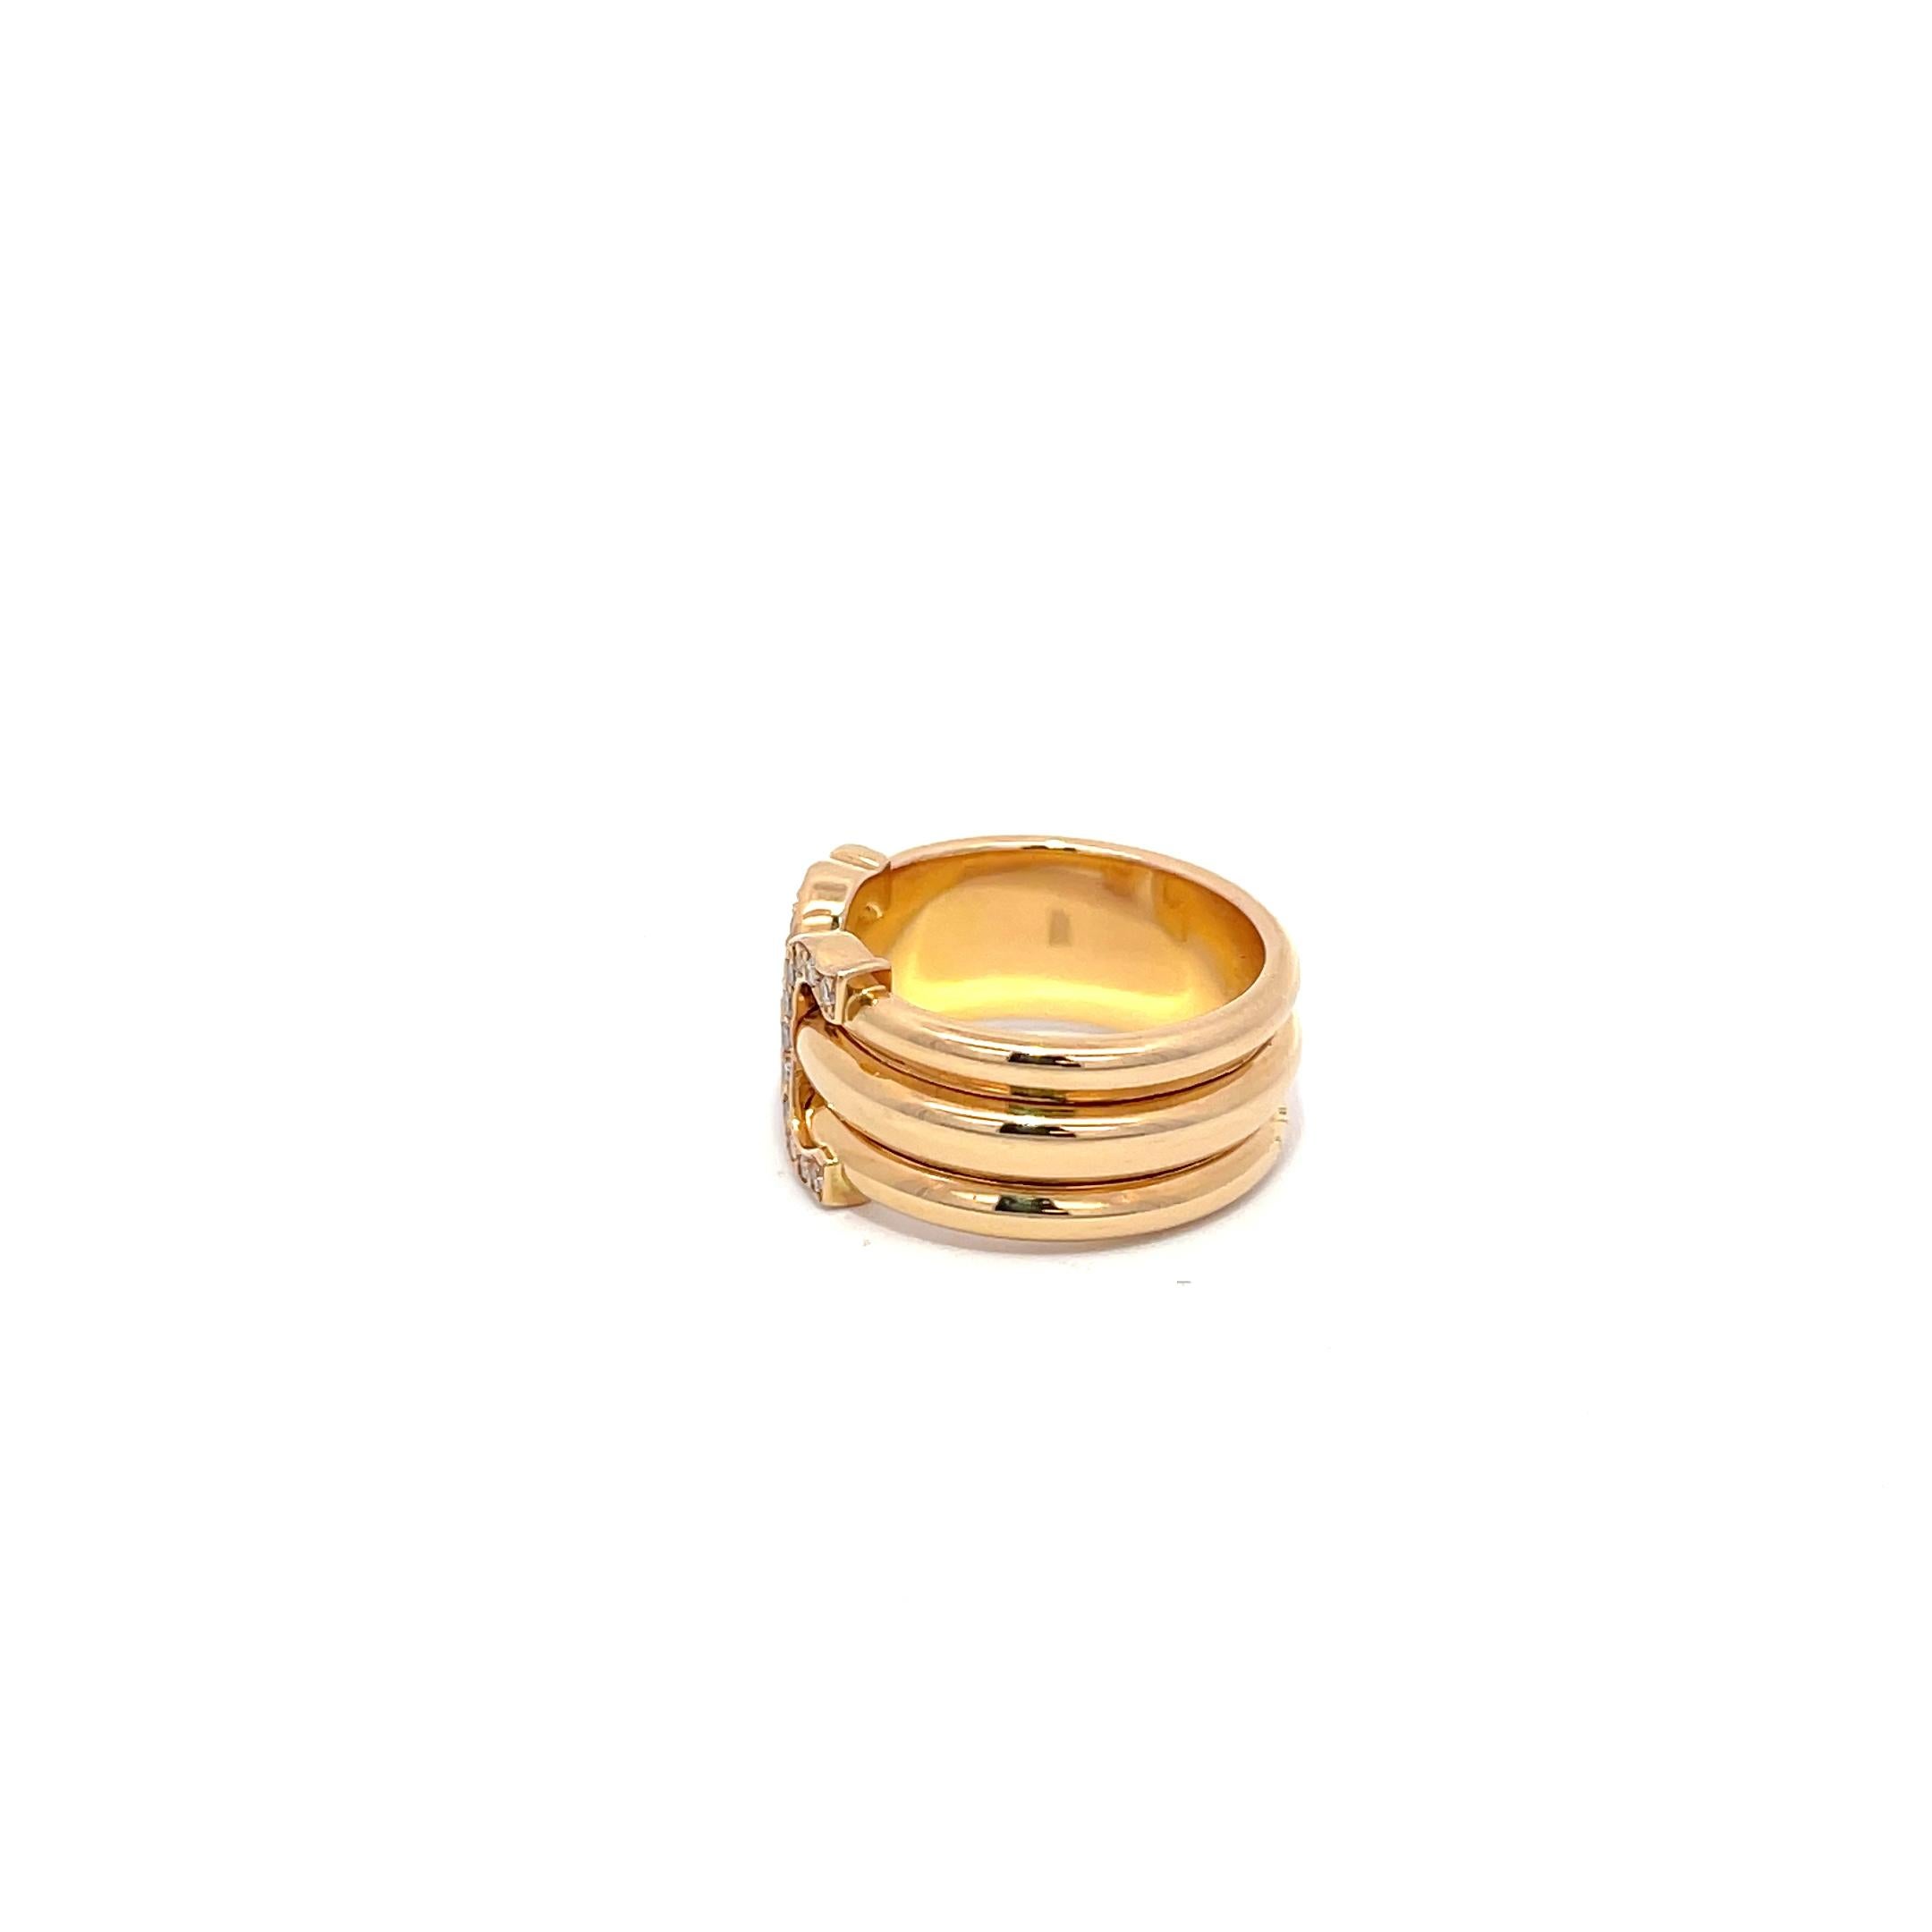  C de Cartier Diamond Ring 18K Yellow Gold In Excellent Condition For Sale In Dallas, TX